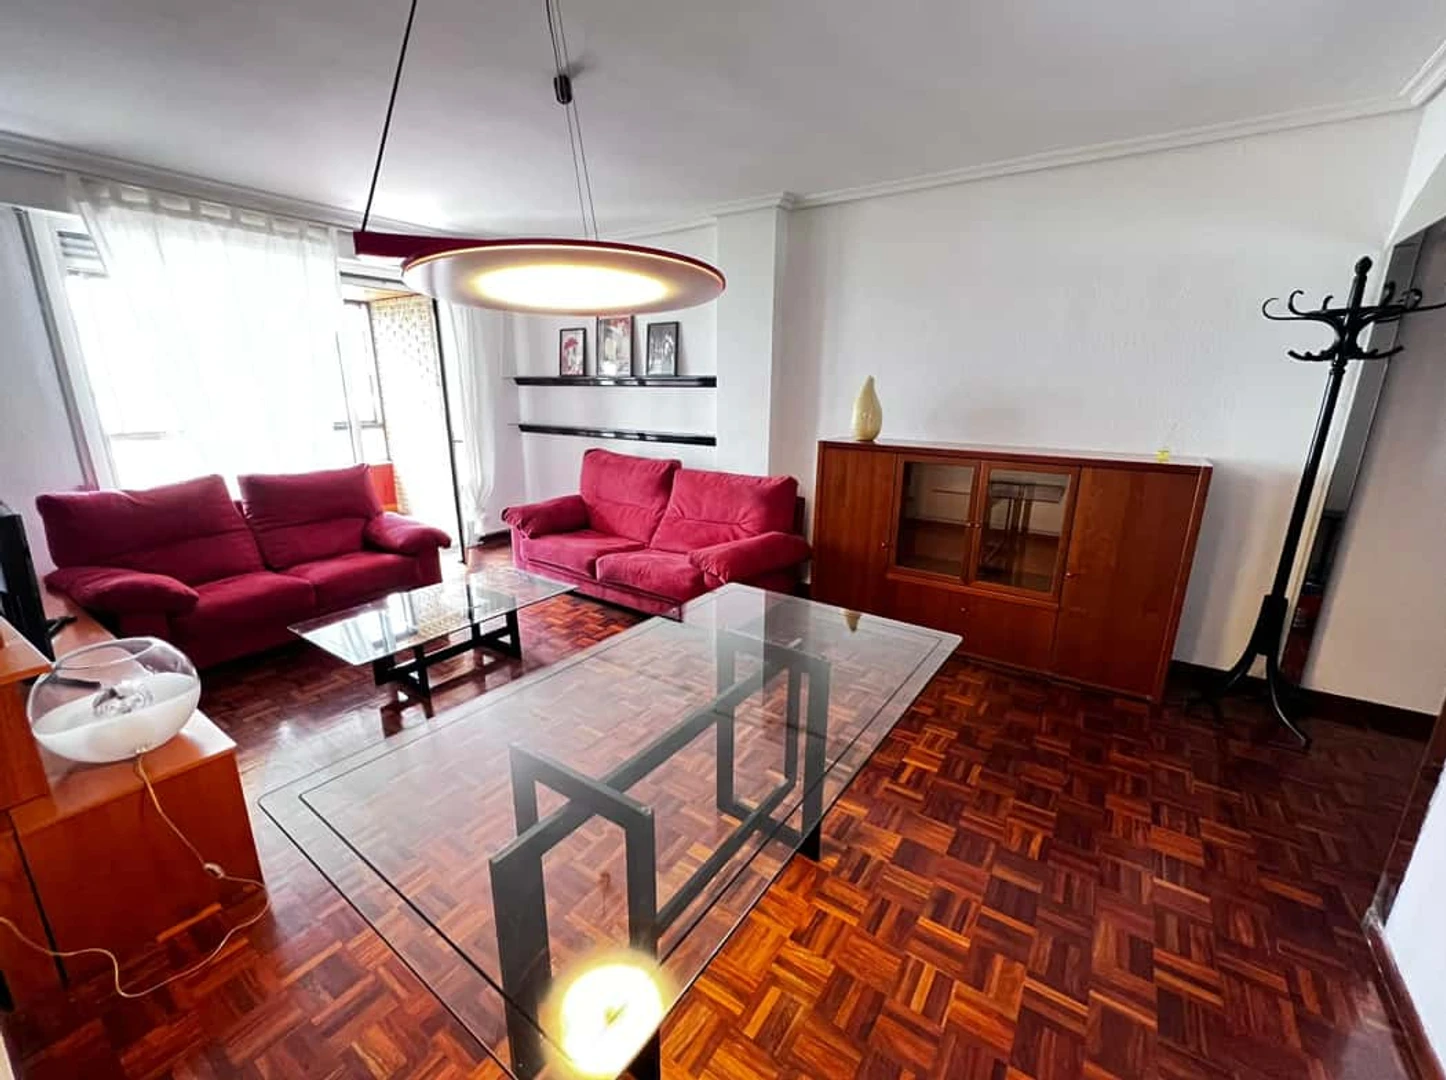 Accommodation with 3 bedrooms in Pamplona/iruña